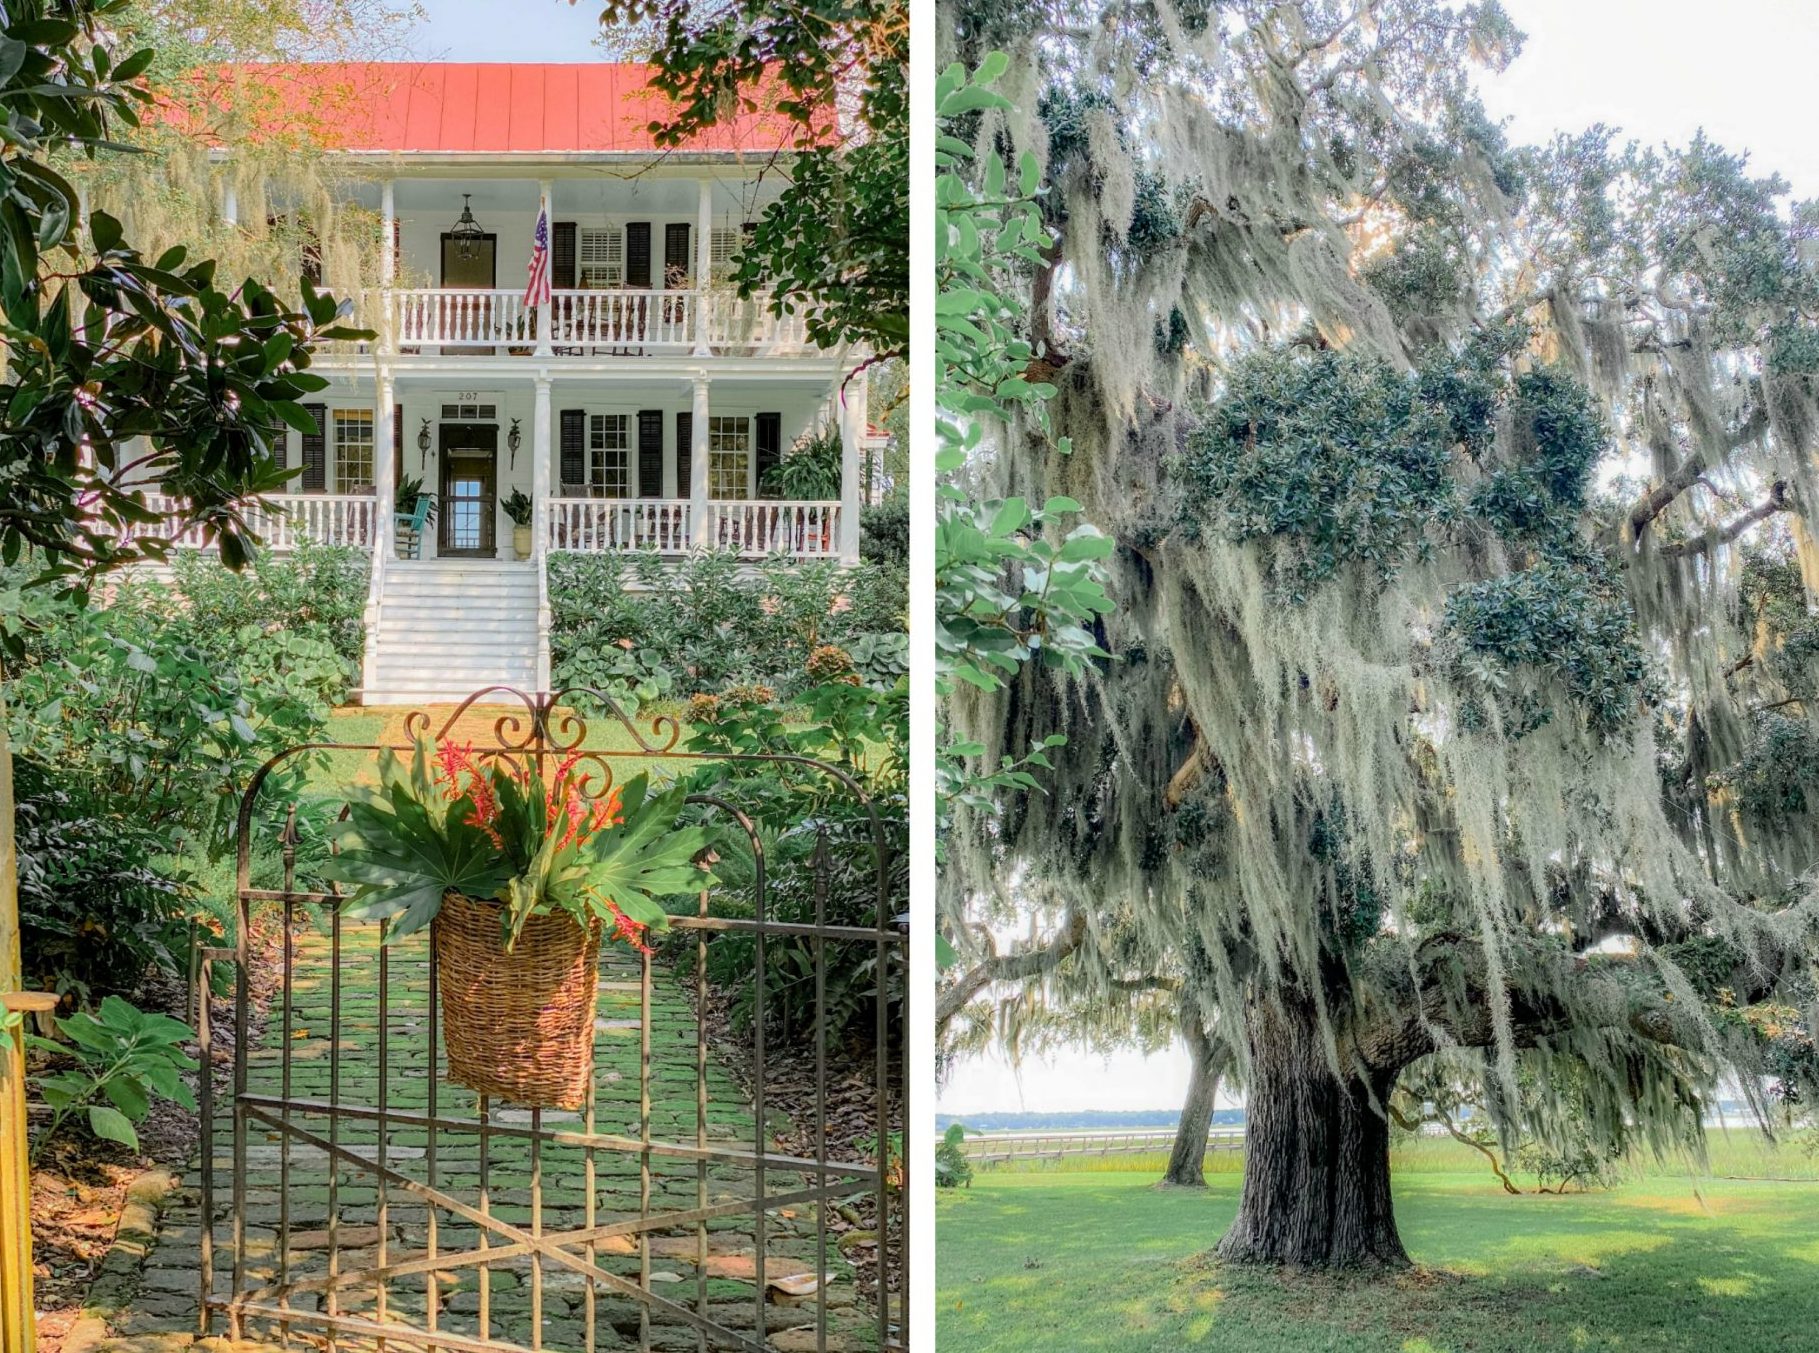 Beaufort travel, Thomas Rhett house, bed and breakfast, low country, travel guide, weekend trip, road trip, marsh, where to eat, where to stay, what to do, southern, Spanish moss, beautiful travel